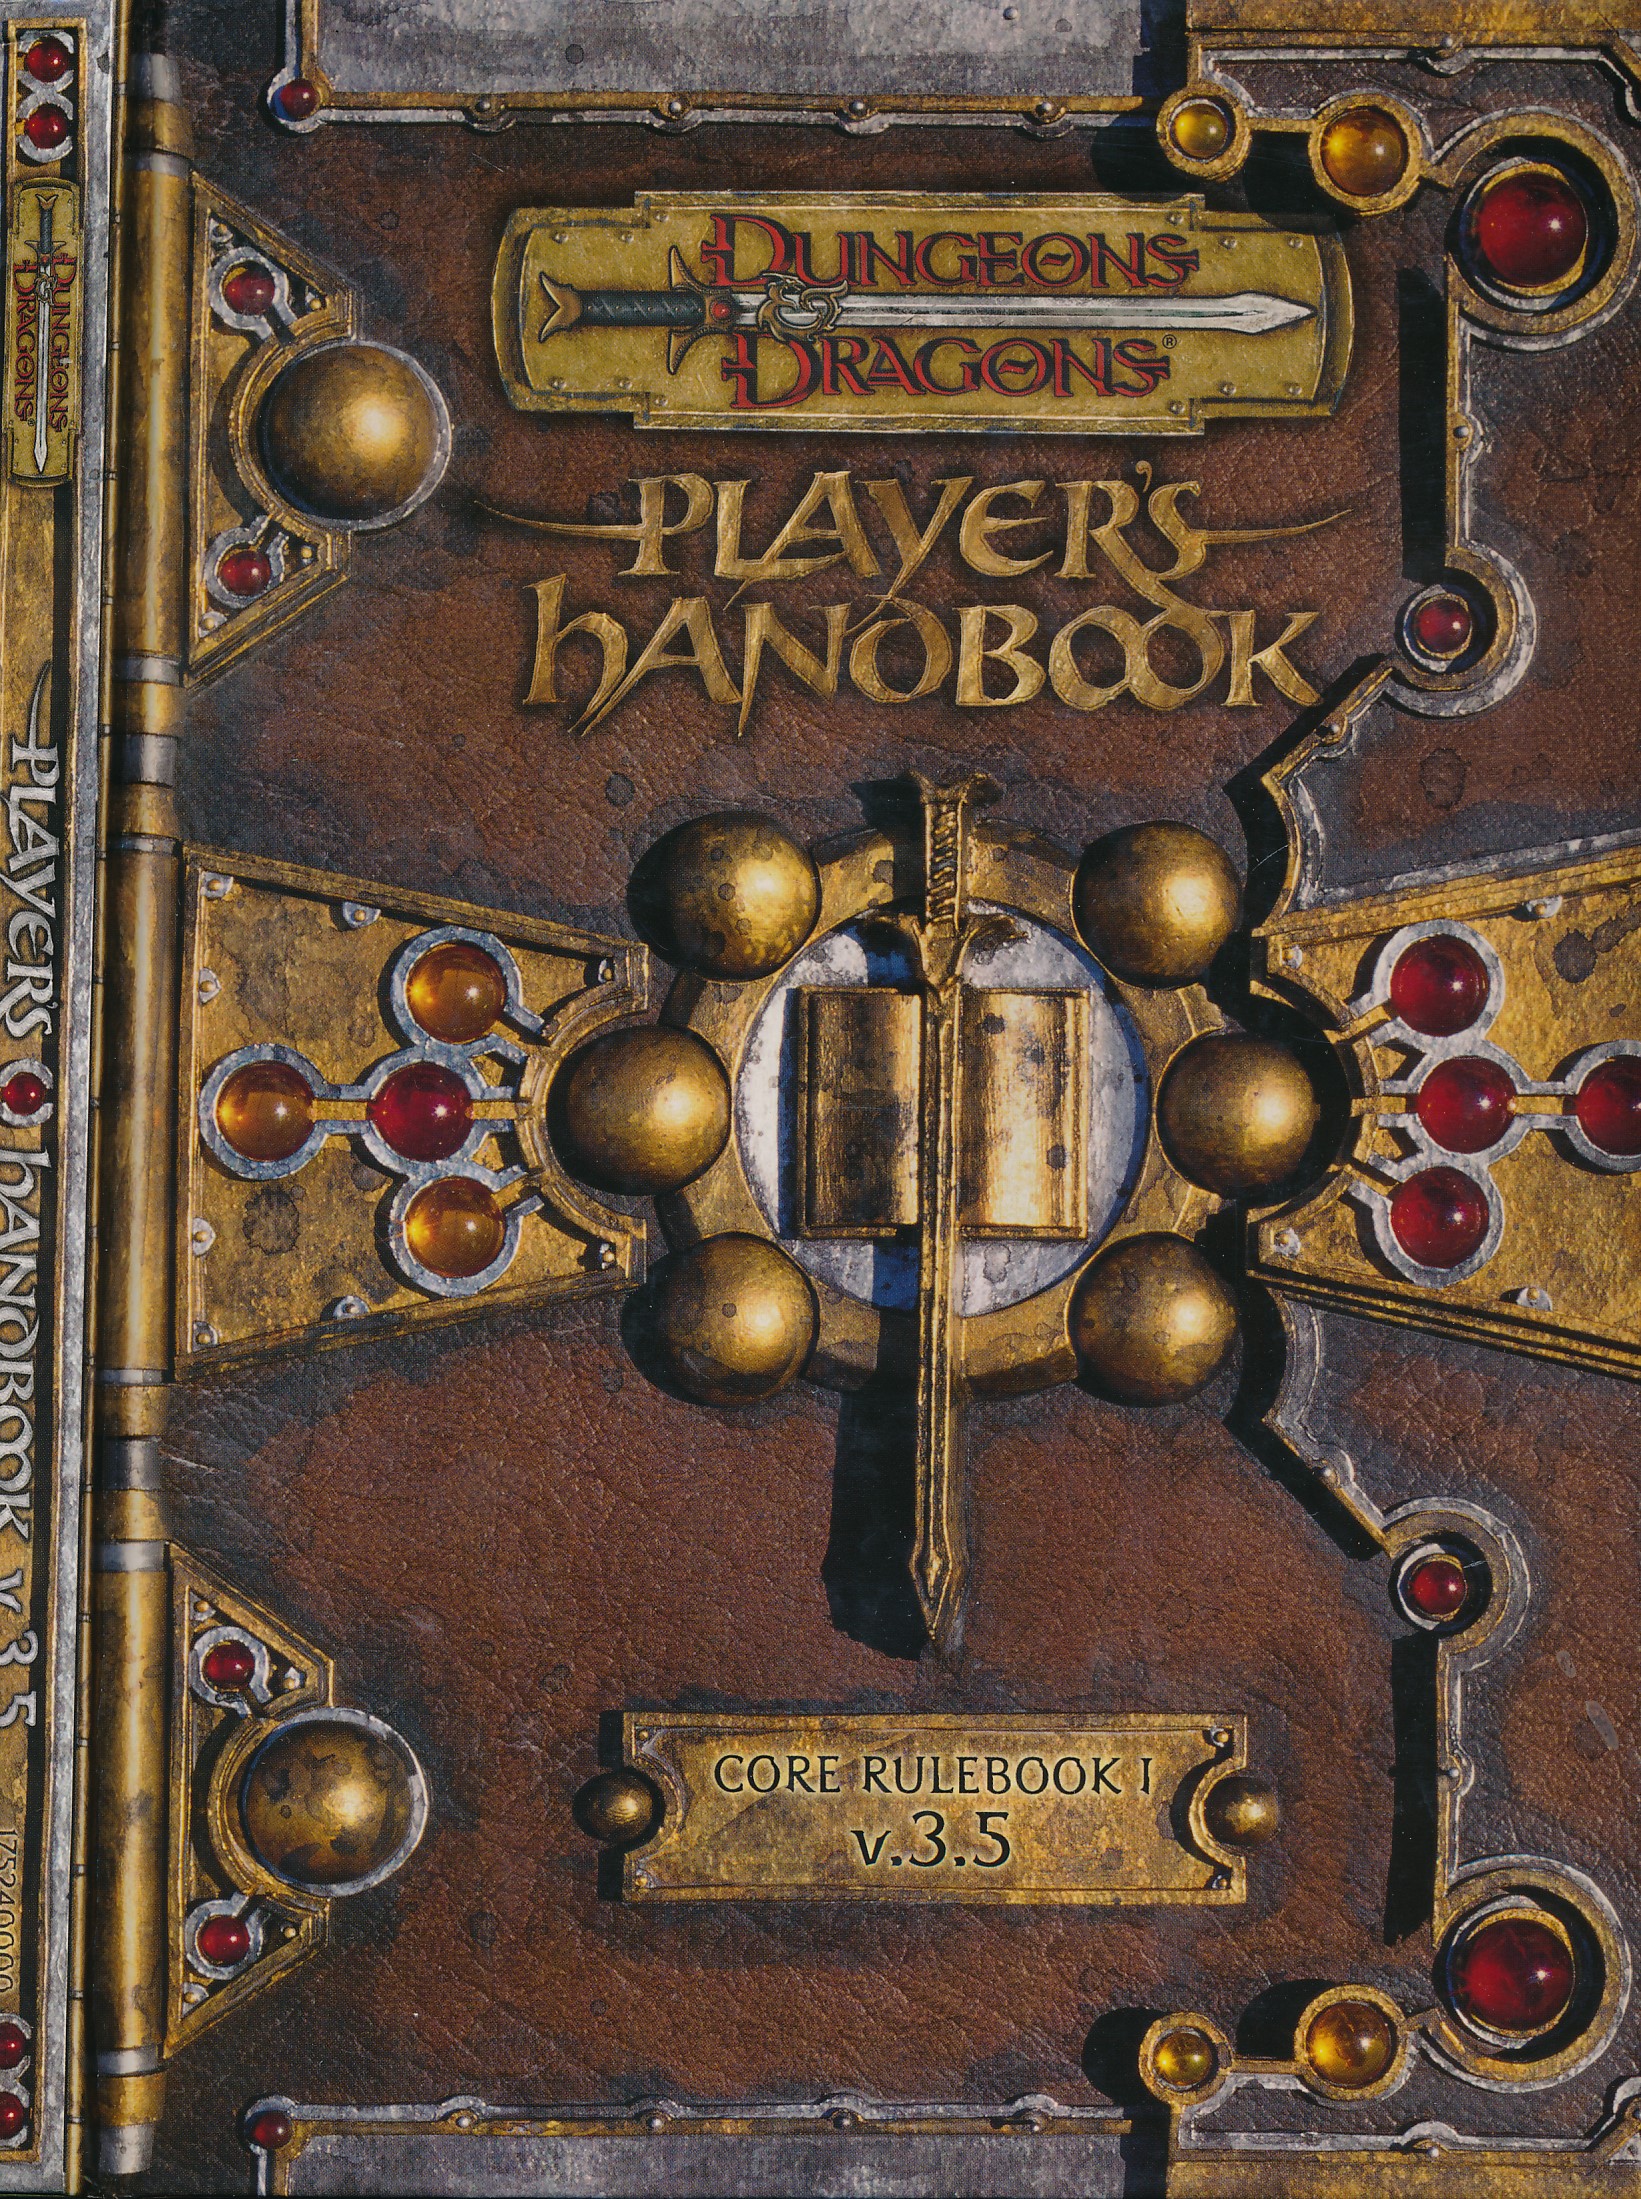 Dungeons & Dragons Player's Handbook. Core Rule Book I v. 3.5